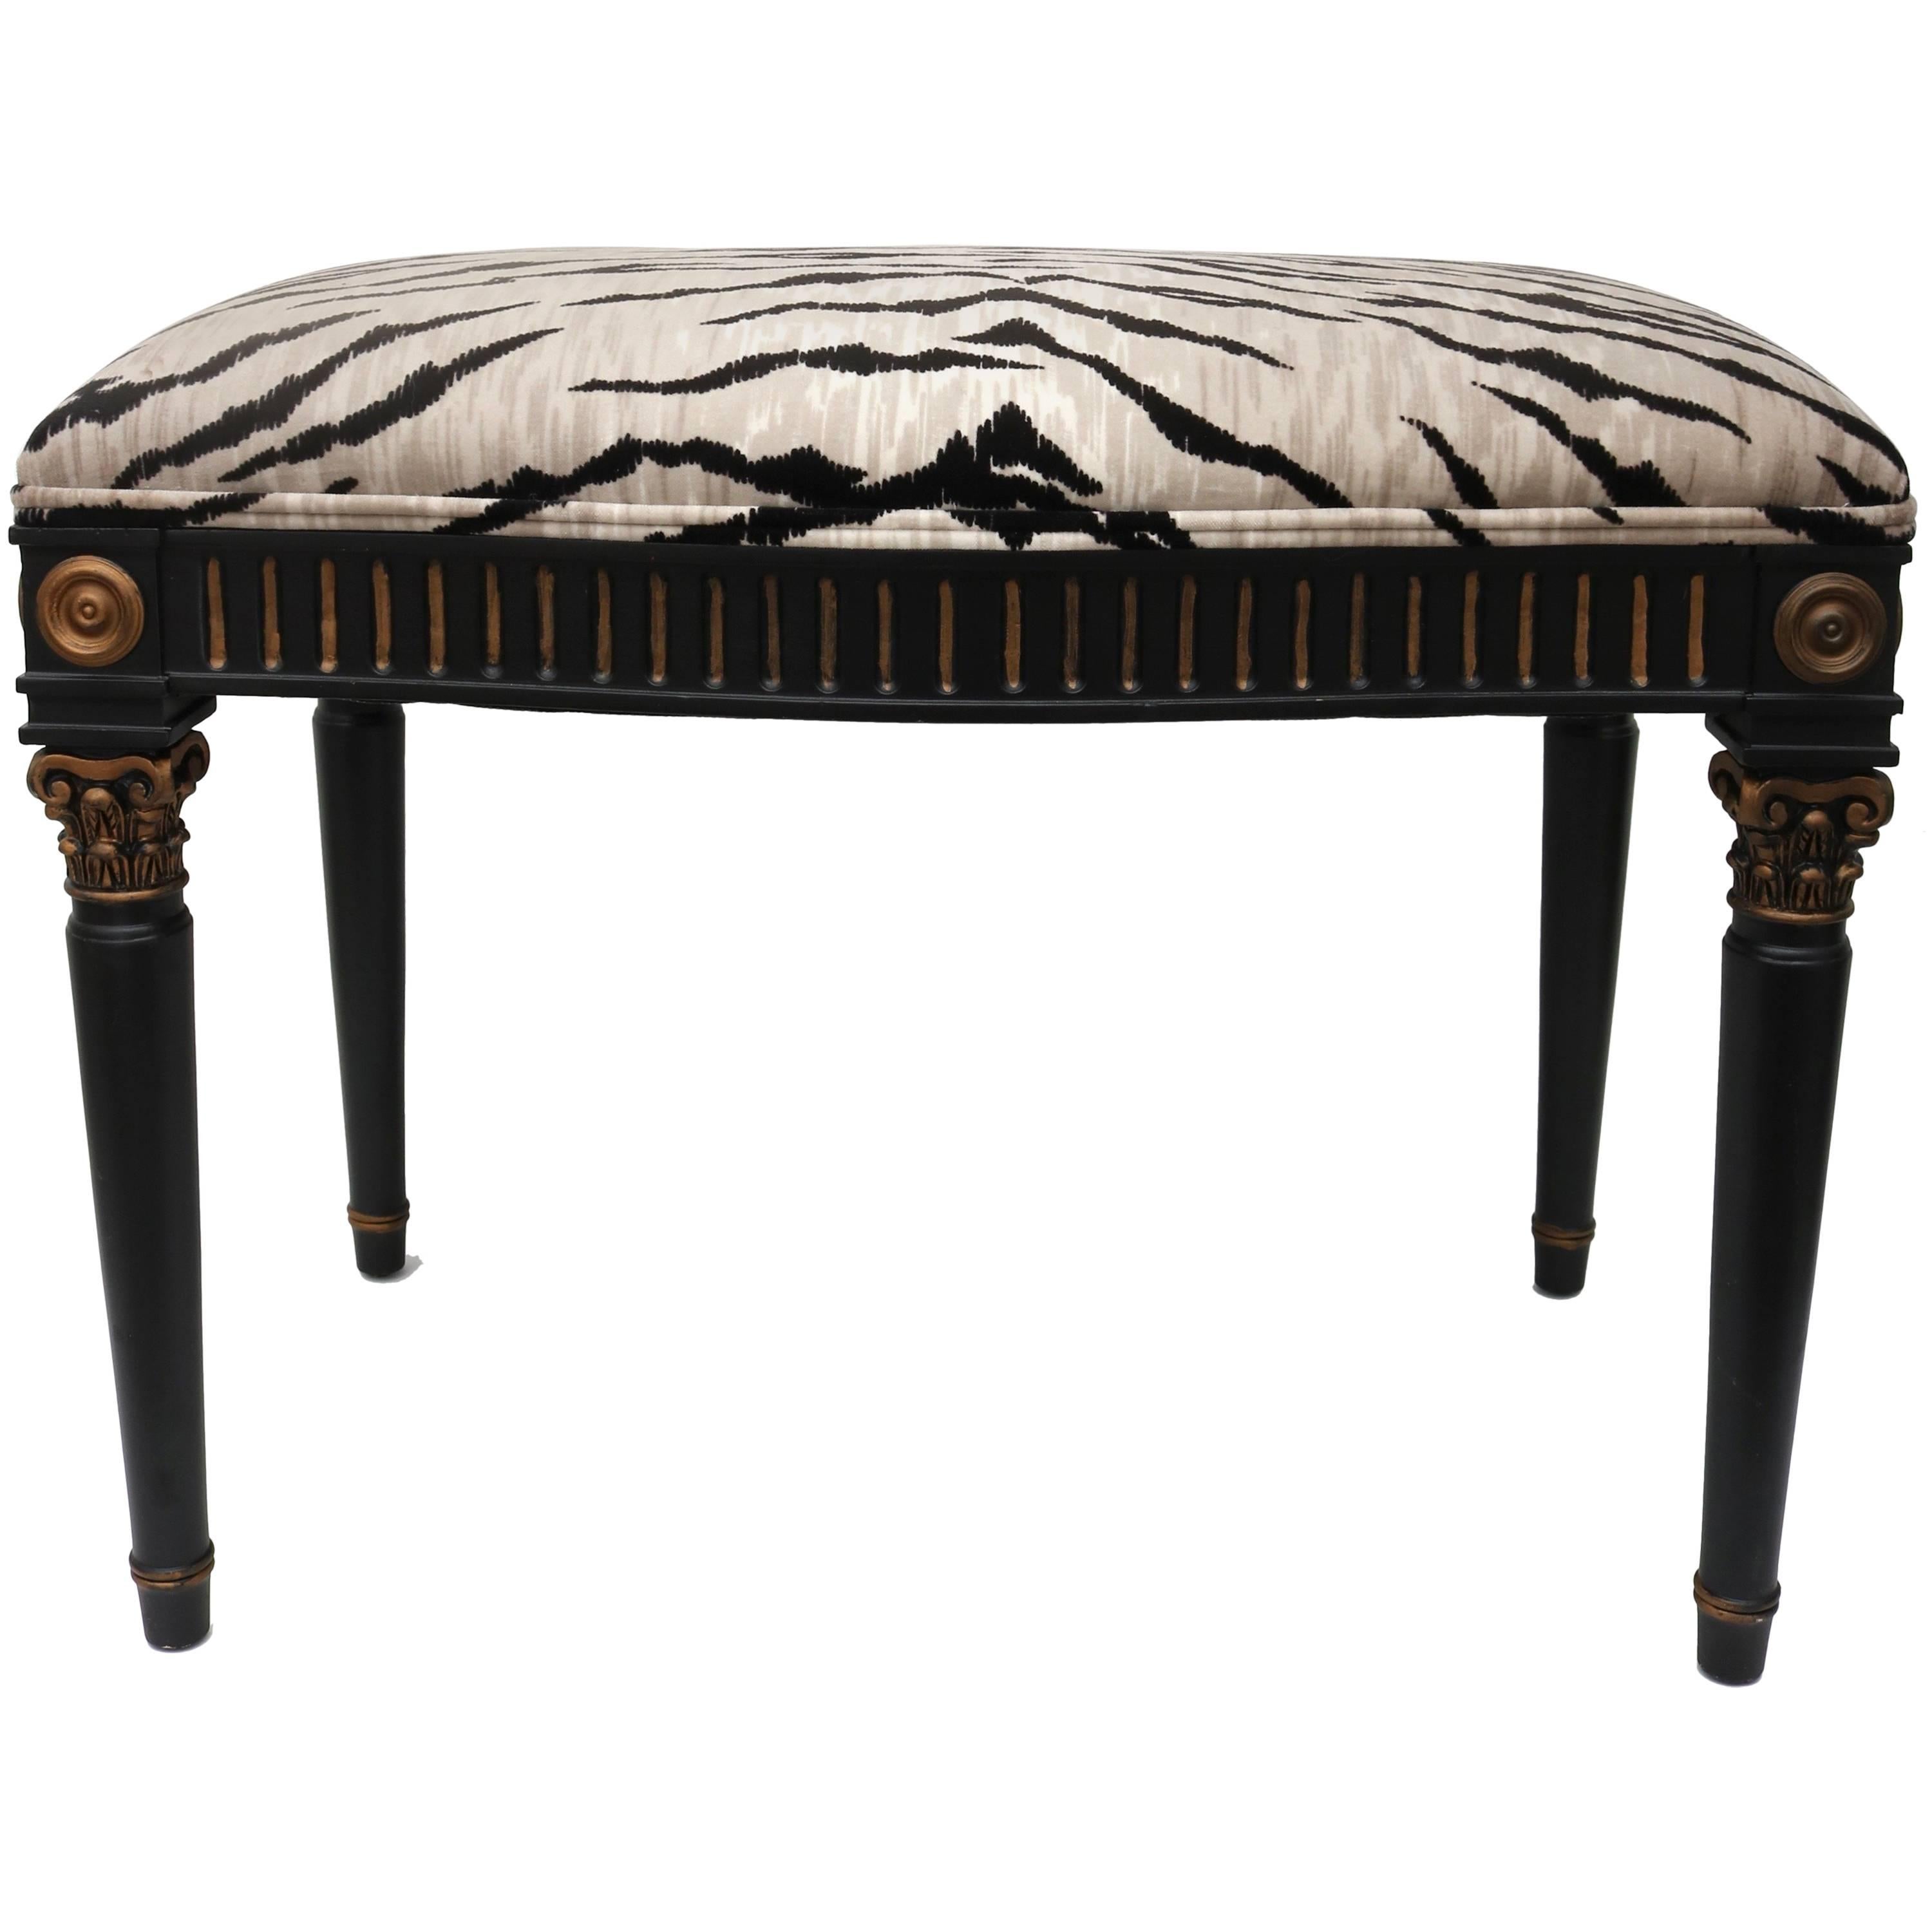 Louis XVI Style Bench in Black and Gold with Tiger Motif Fabric